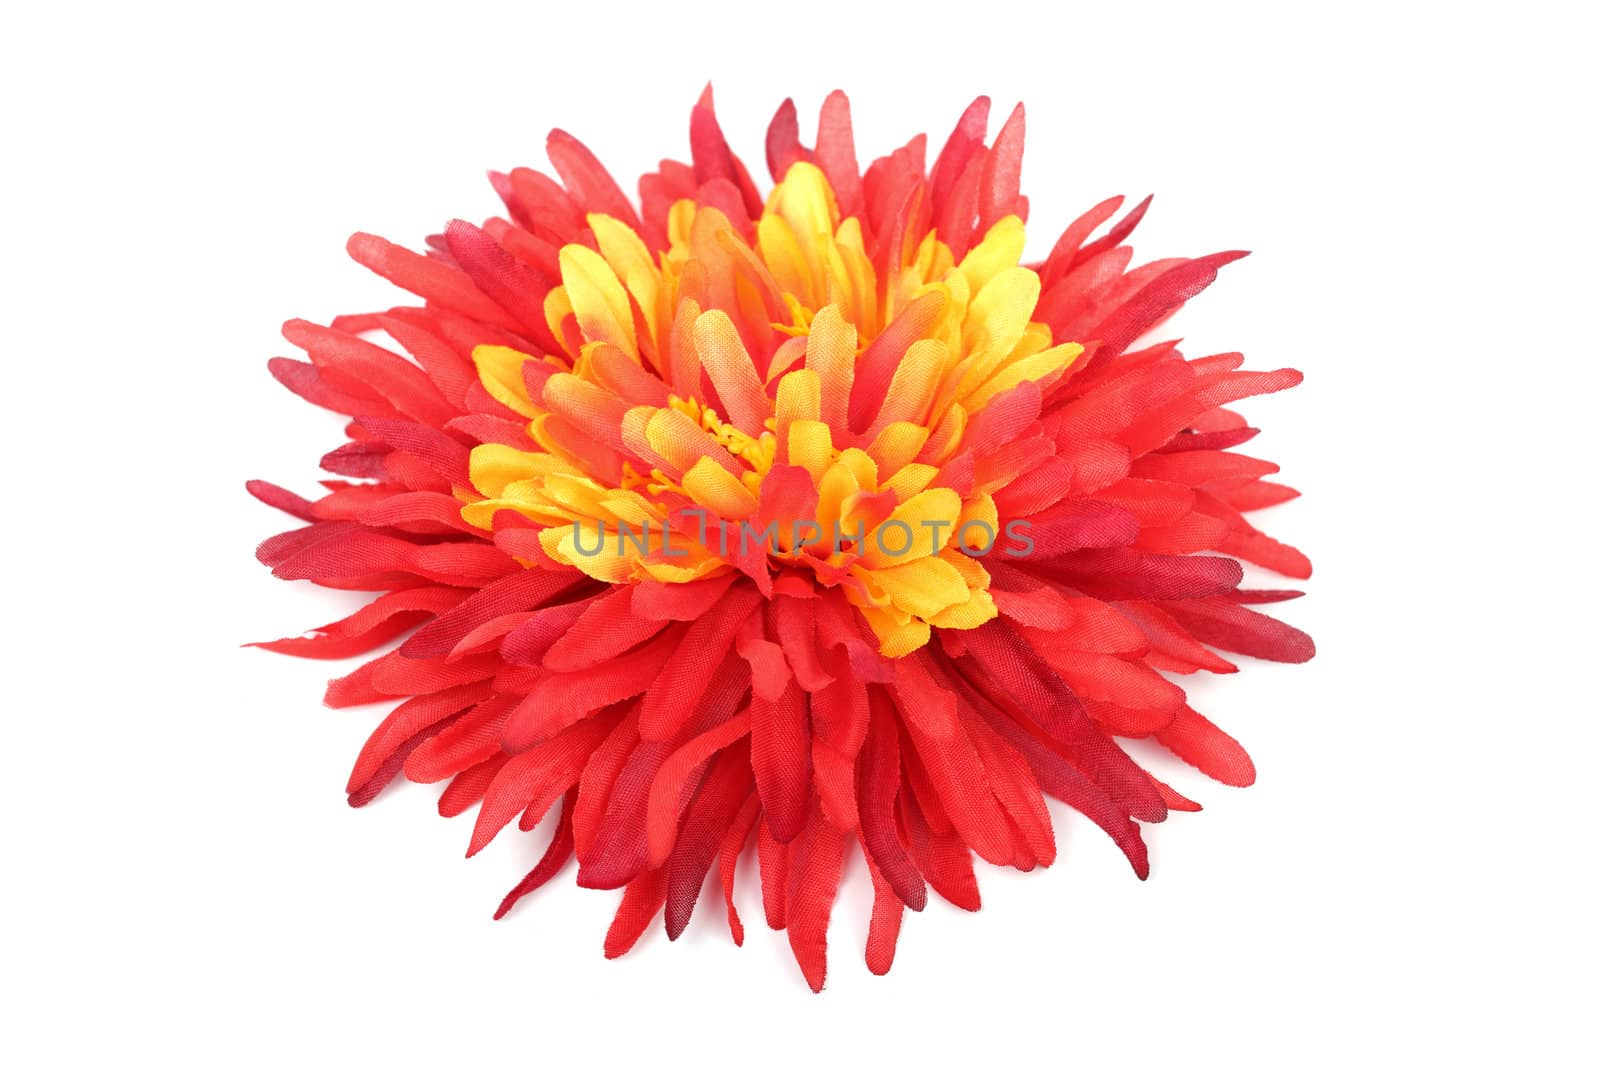 Red with yellow daisy head isolated on white background.